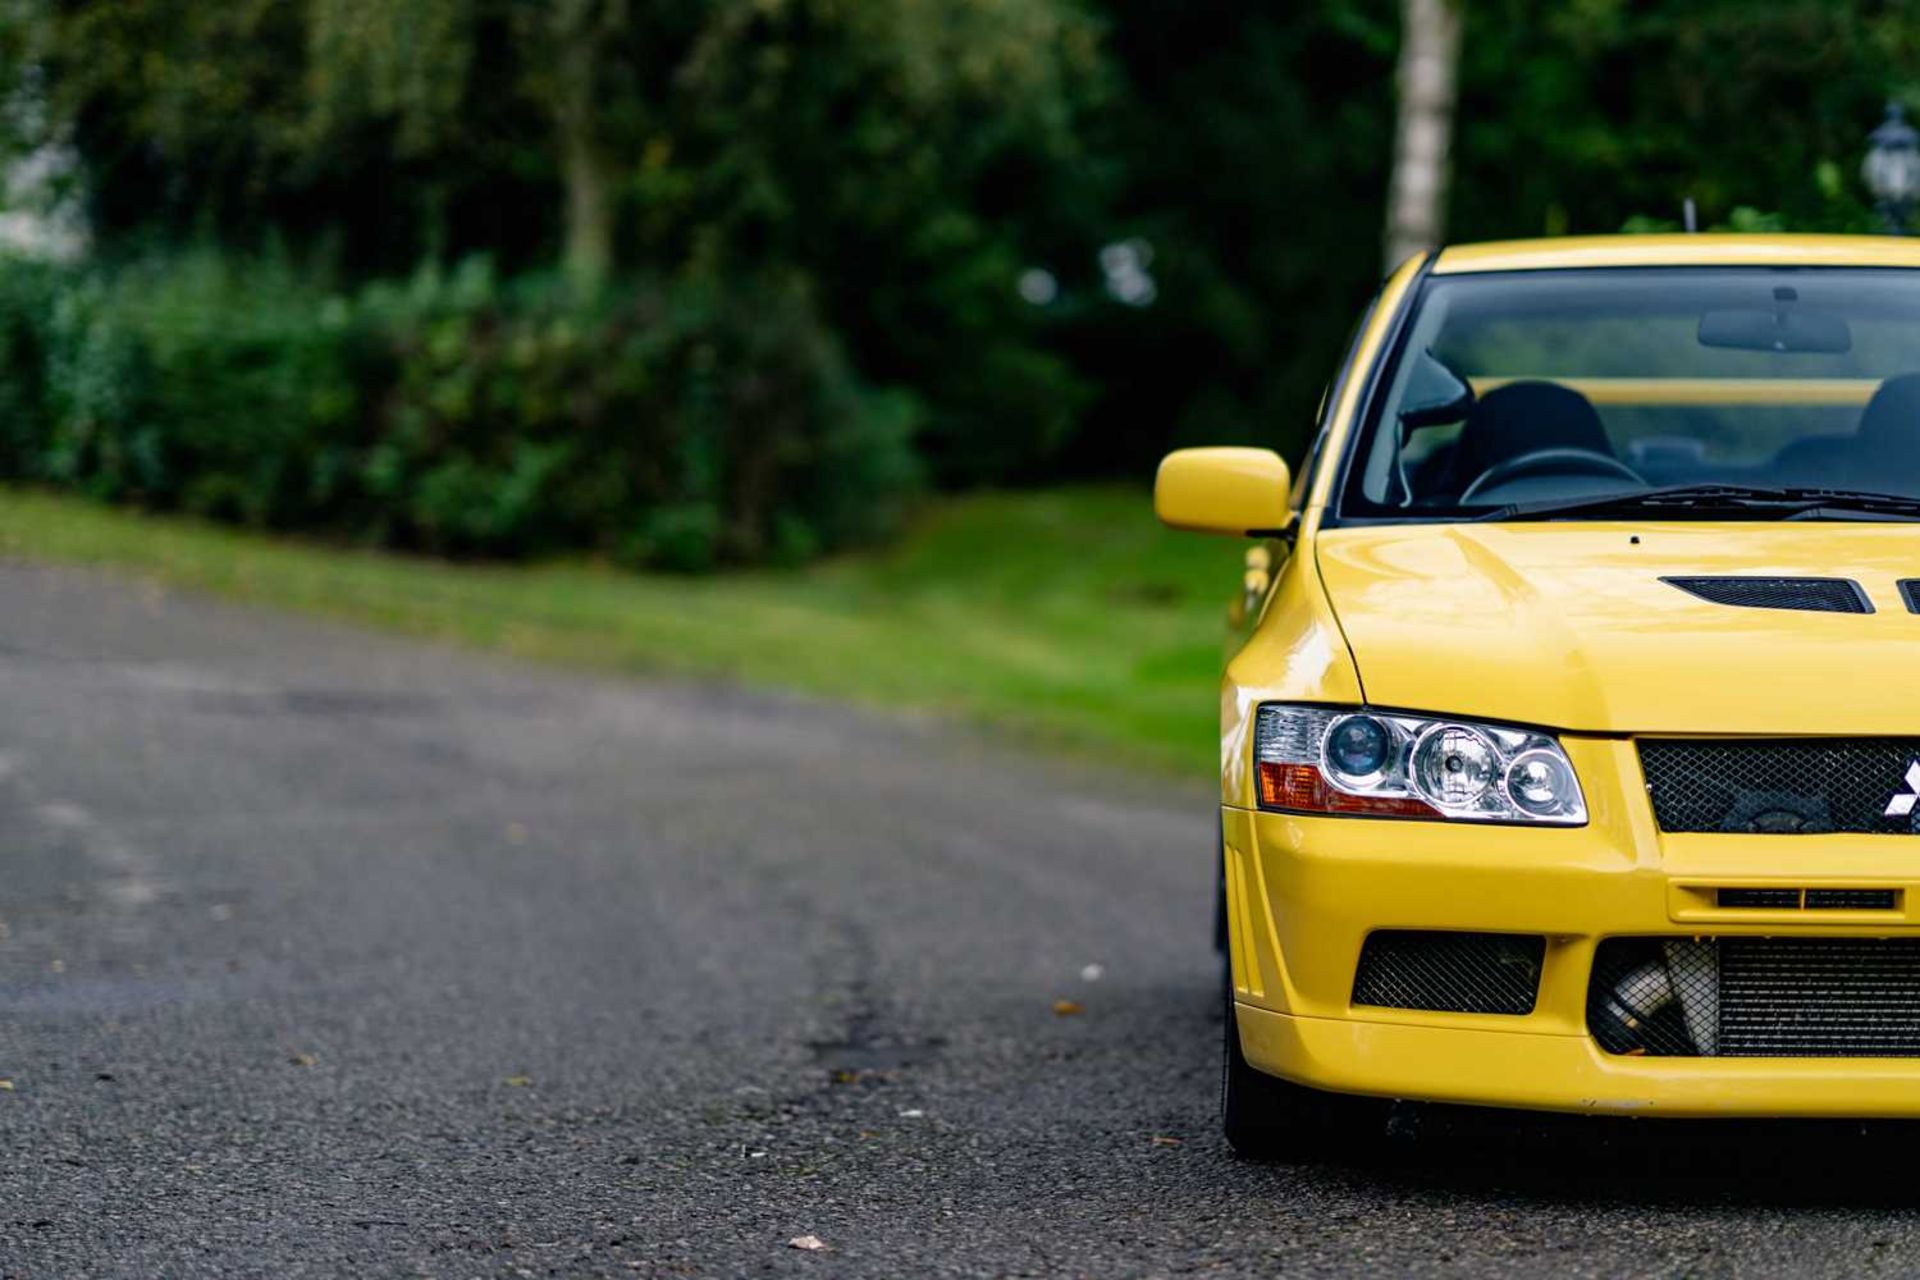 2001 Mitsubishi Lancer Evolution VII Subtly upgraded and previous long-term (seventeen year) ownersh - Image 2 of 64